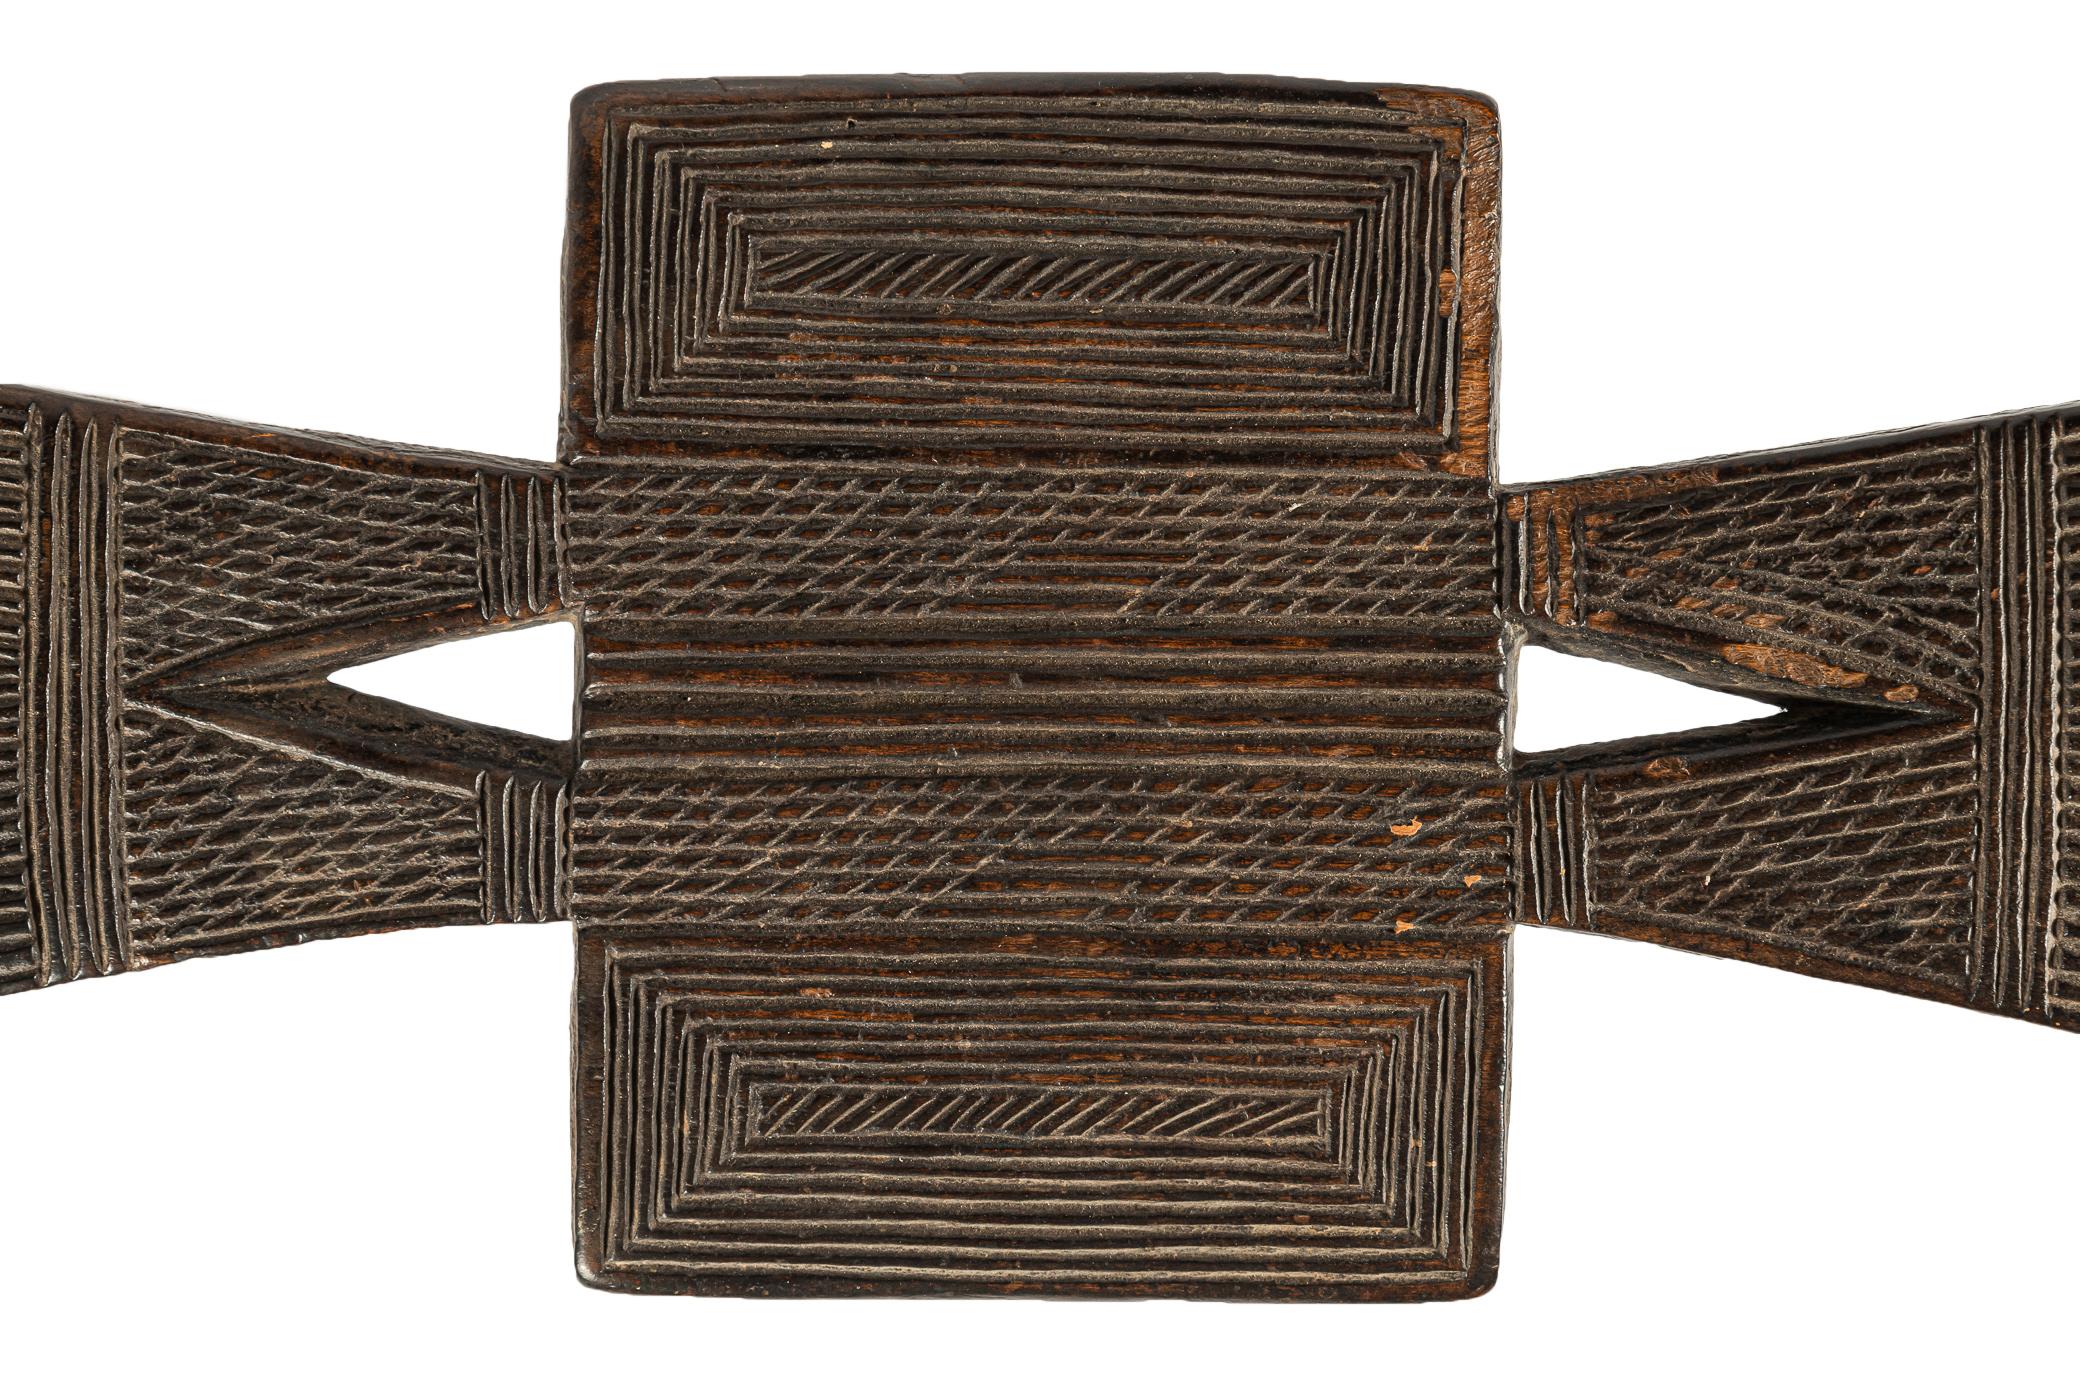 Congolese Mongo Seating, Democratic Republic of the Congo, Early 20th Century